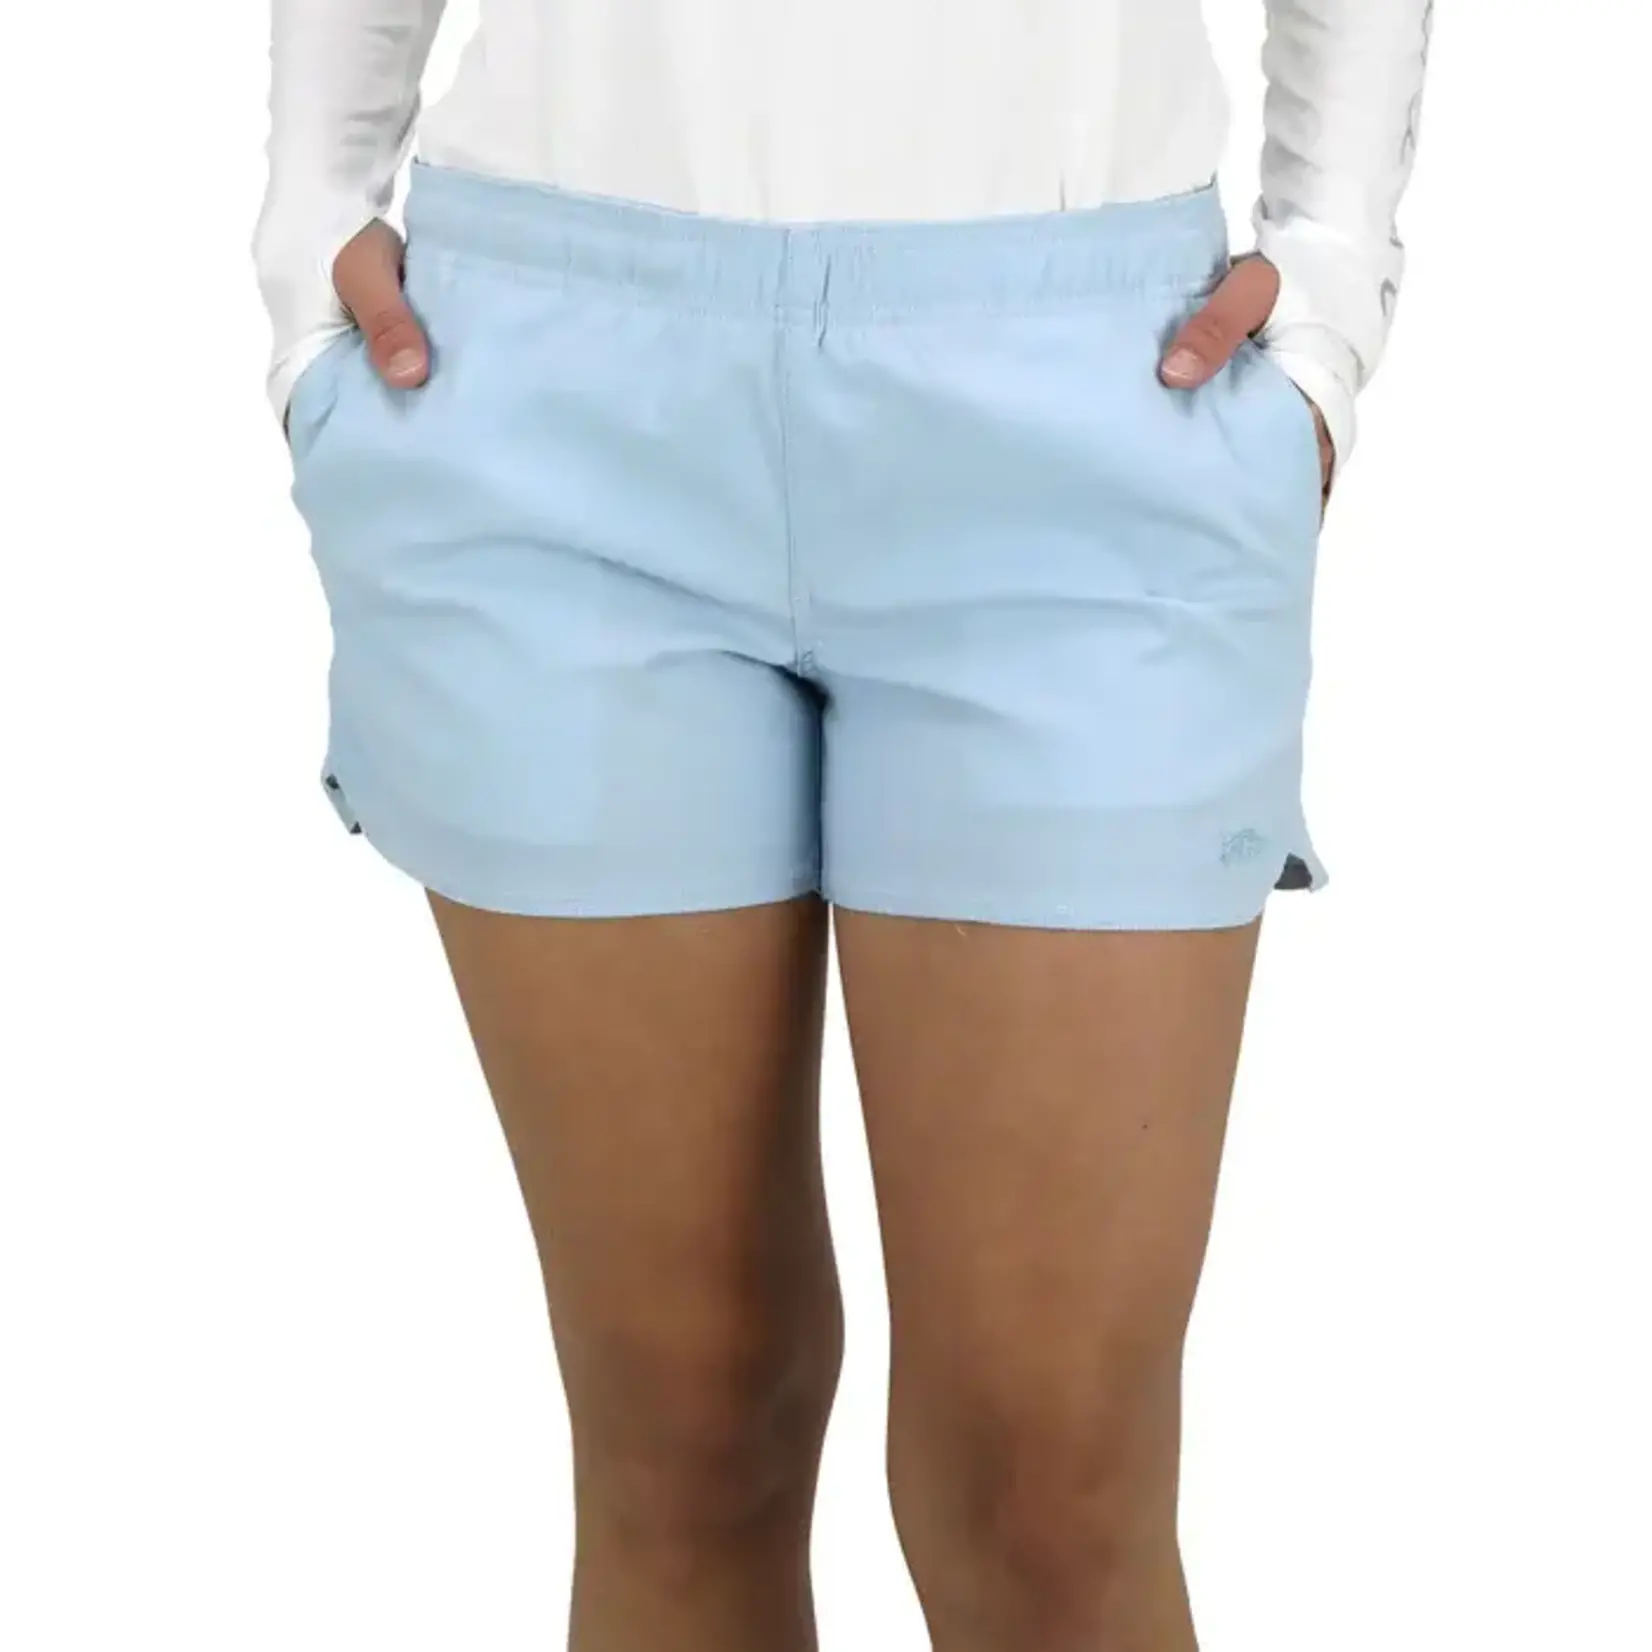 Aftco Aftco W201 Women's Sirena Shorts